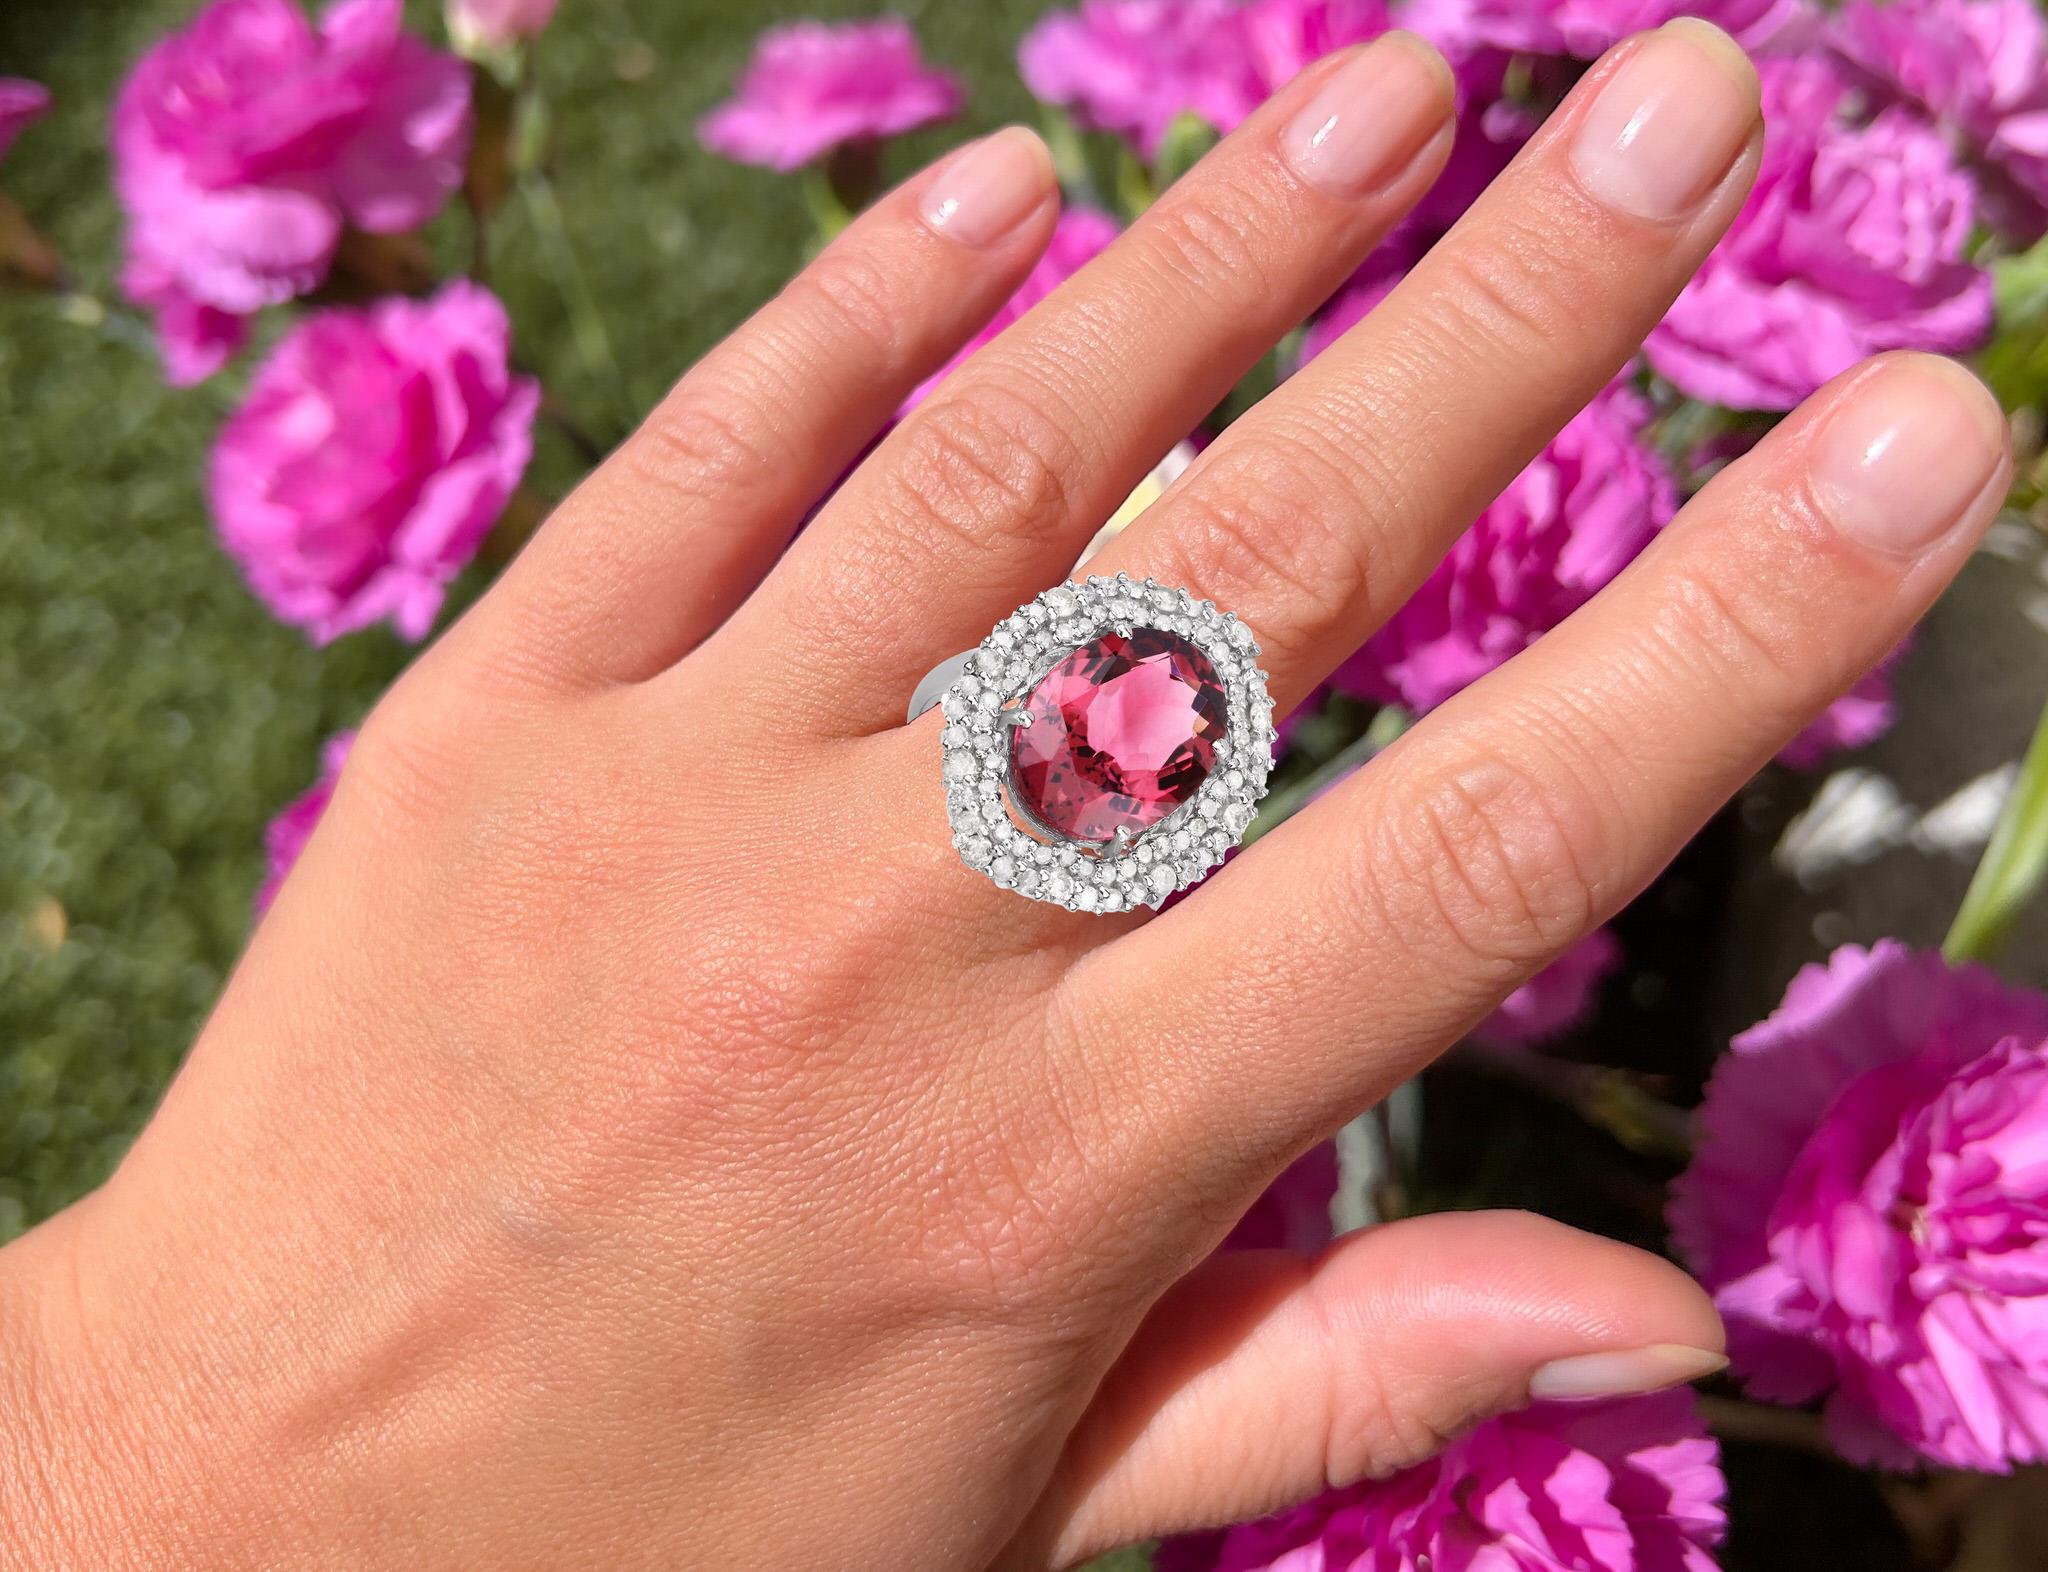 It comes with the appraisal by GIA GG/AJP
All Gemstones are Natural  
Pink Tourmaline = 7.85 Carat
74 Diamonds = 1.16 Carats
Metal: Black Rhodium Plated Sterling Silver 
Ring Size: 7.25* US
*It can be resized complimentary